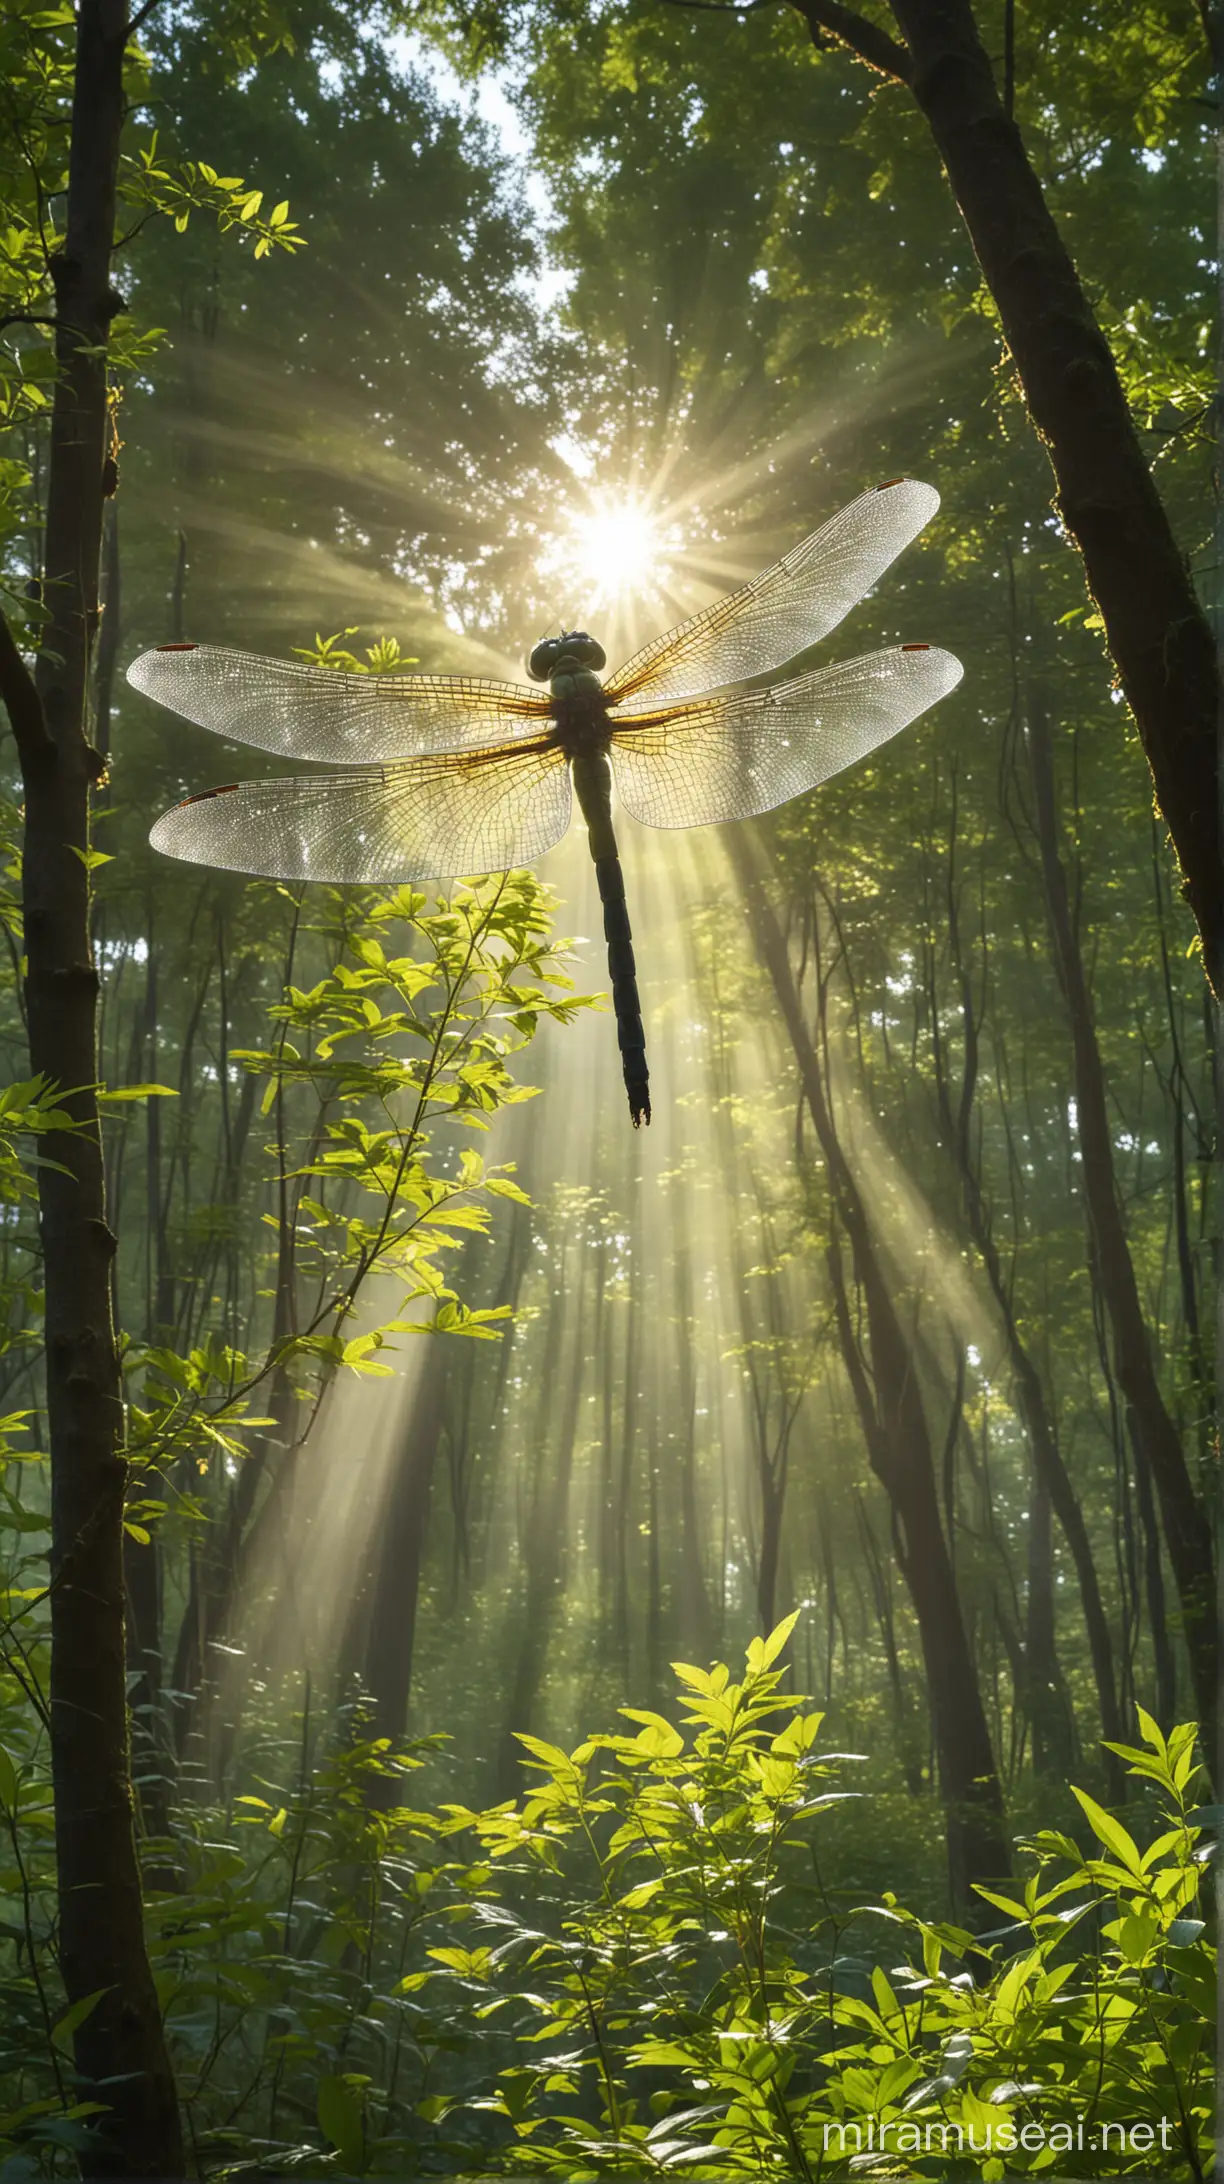 In the forest, as the sunlight gleams on the wings of a dragonfly, a gigantic dragonfly is soaring from the top of a tall tree with its wings spread wide. The dragonfly gracefully glides amidst the greenery, its wings illuminated by a greenish light spreading across the sky.

